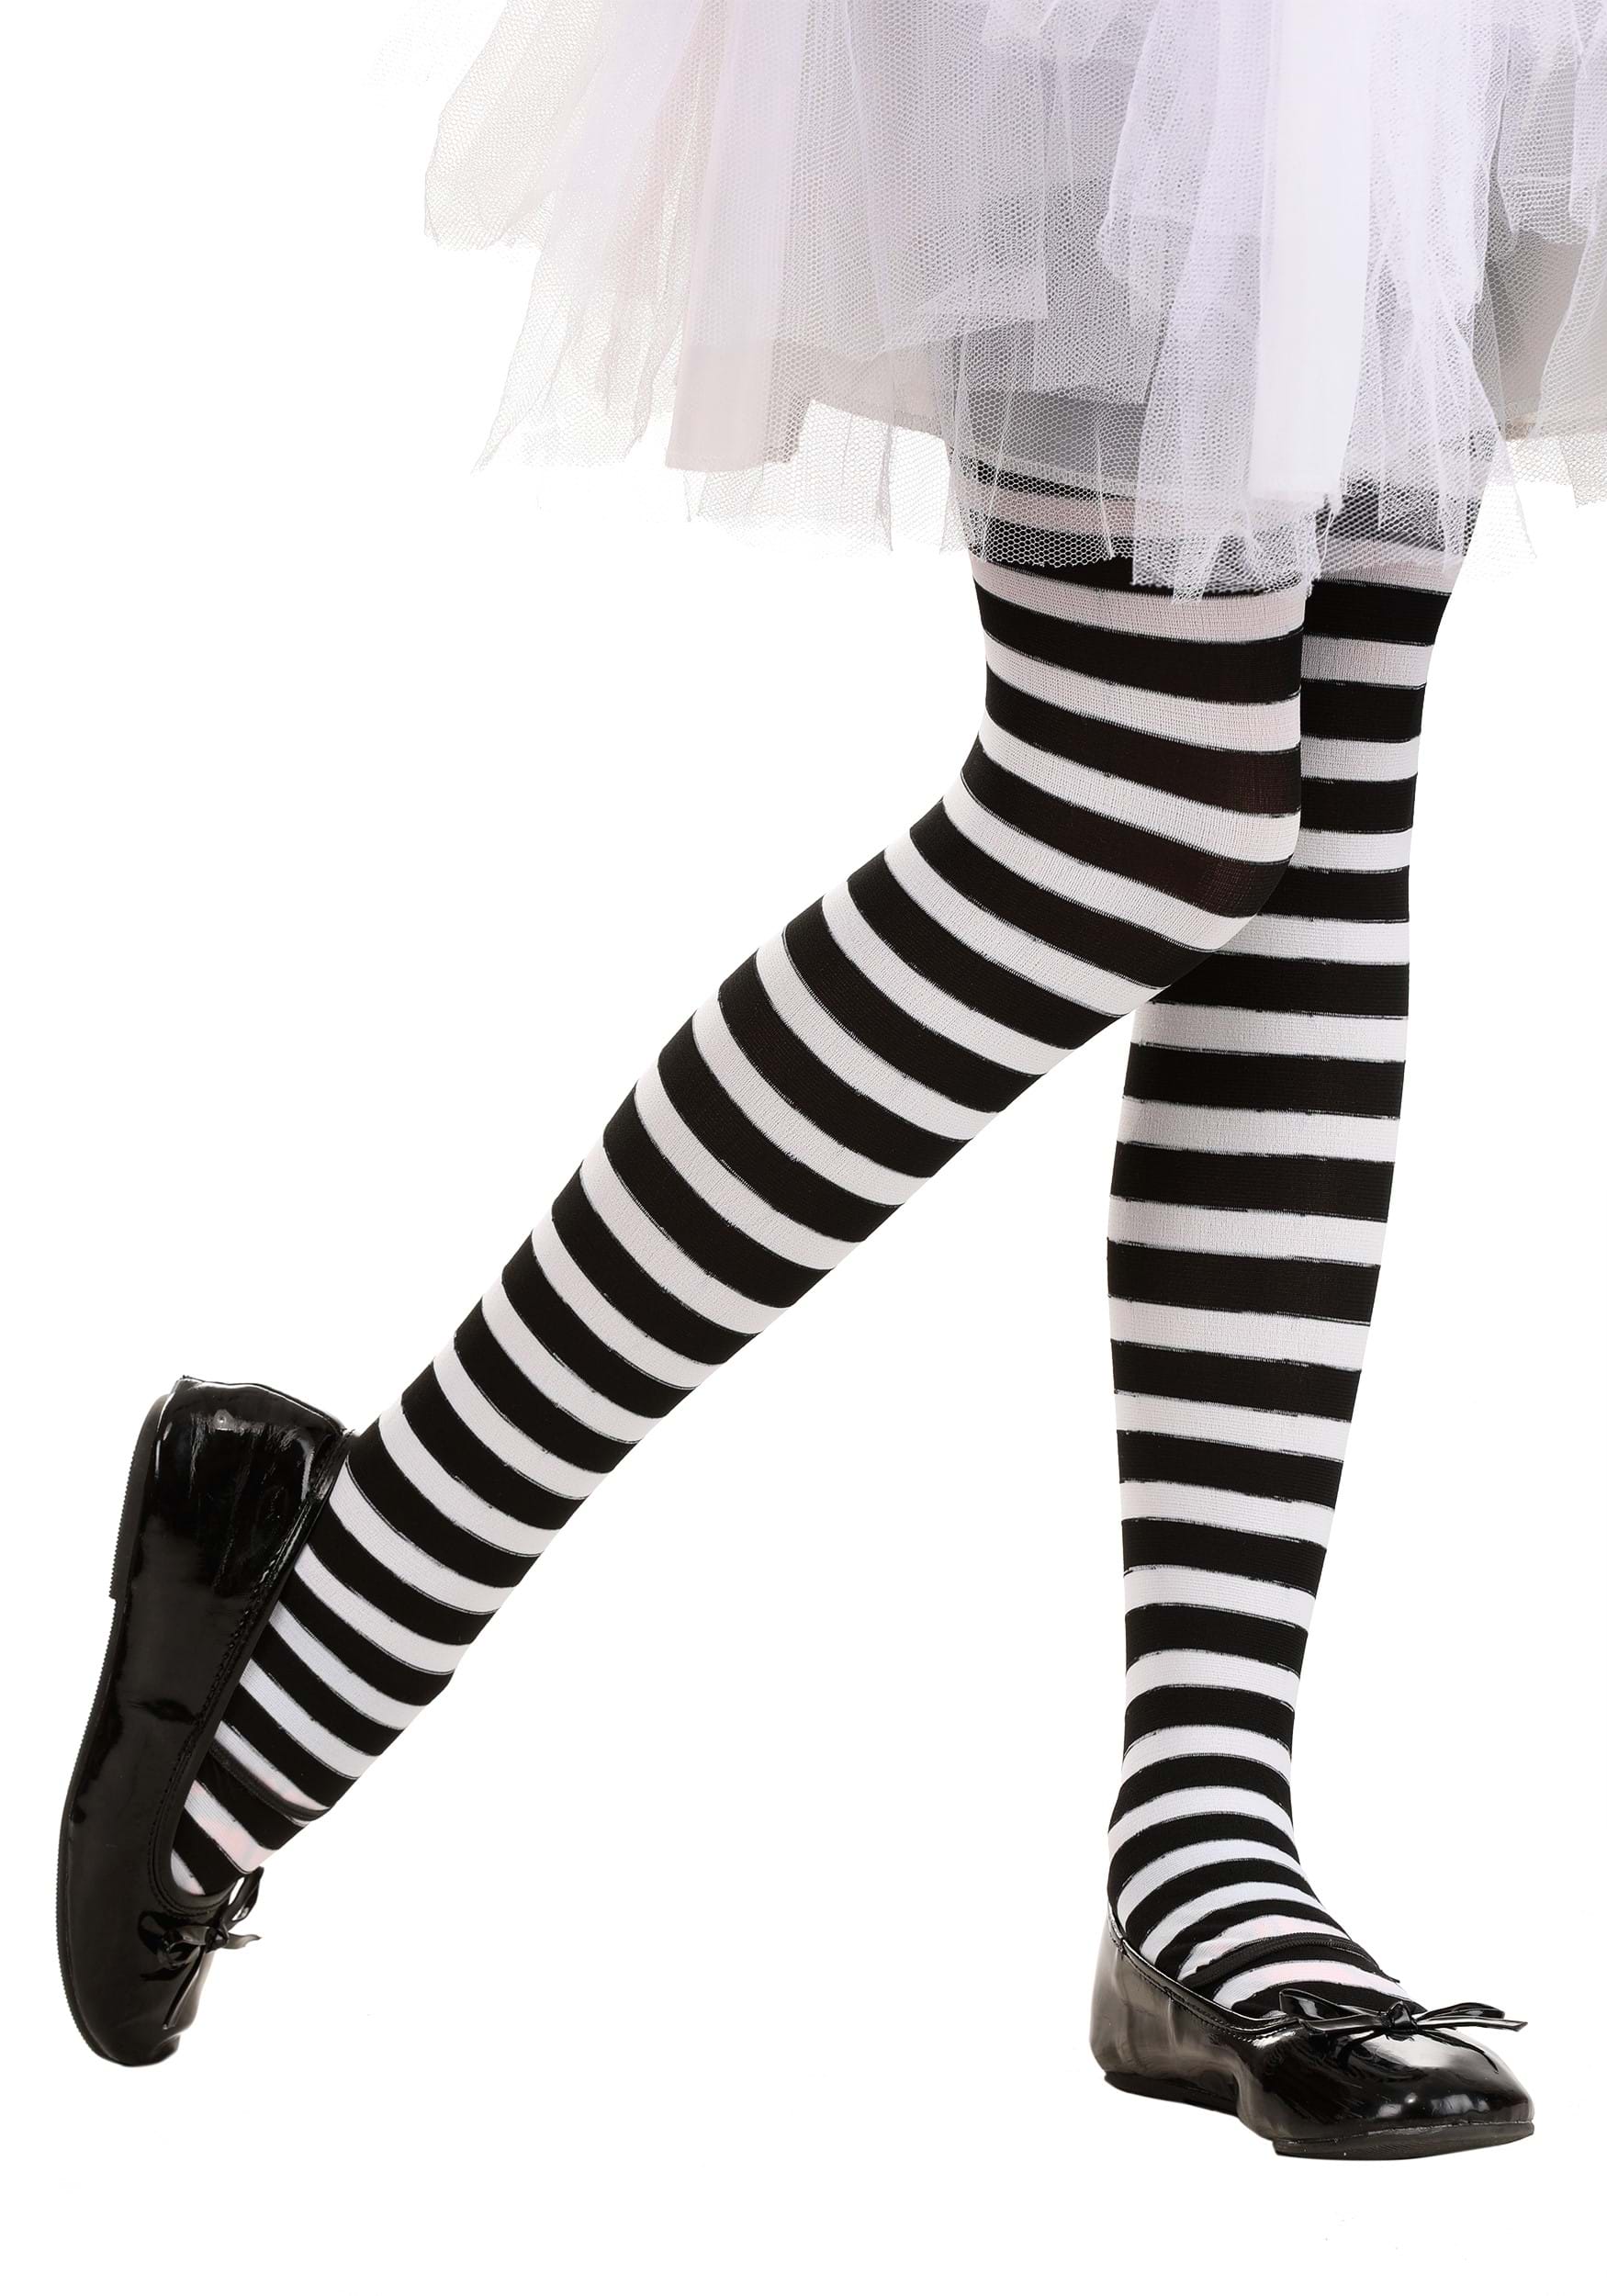 https://images.halloweencostumes.ca/products/89971/1-1/child-black-white-striped-tights.jpg